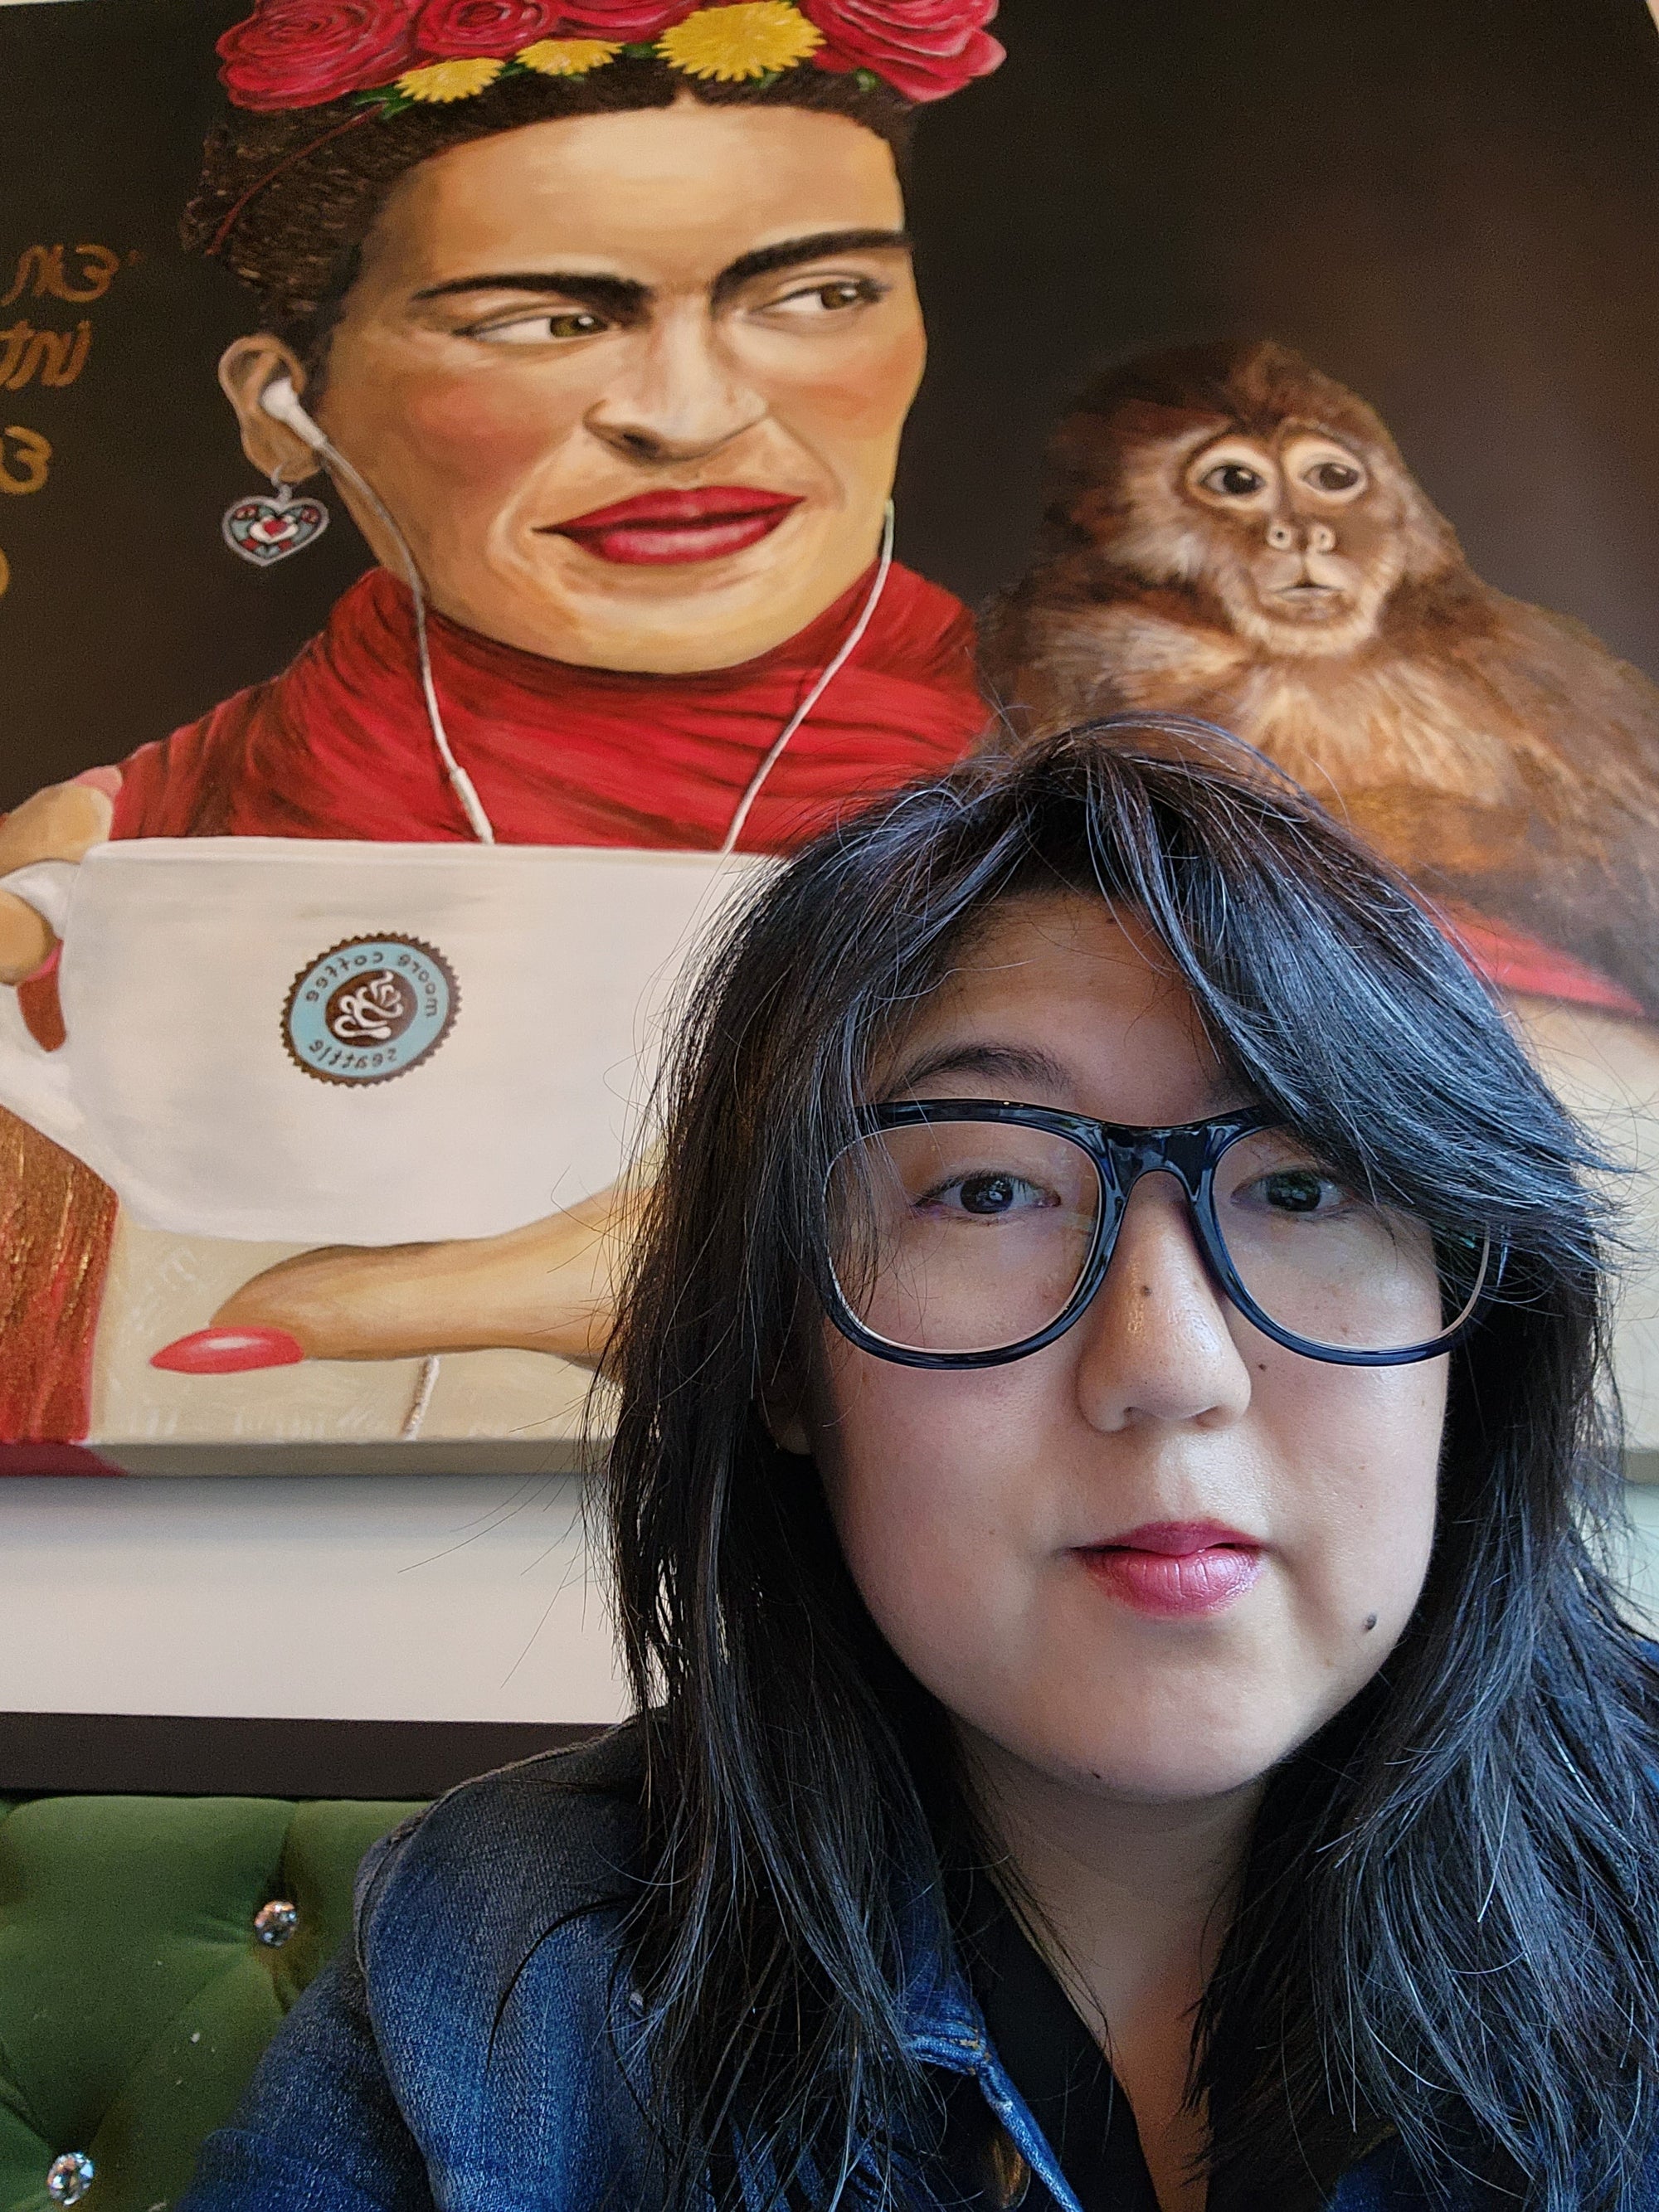 Victoria sits in front of a painting of Frida Kahlo. Victoria has long dark hair, dark glasses, and red lips.